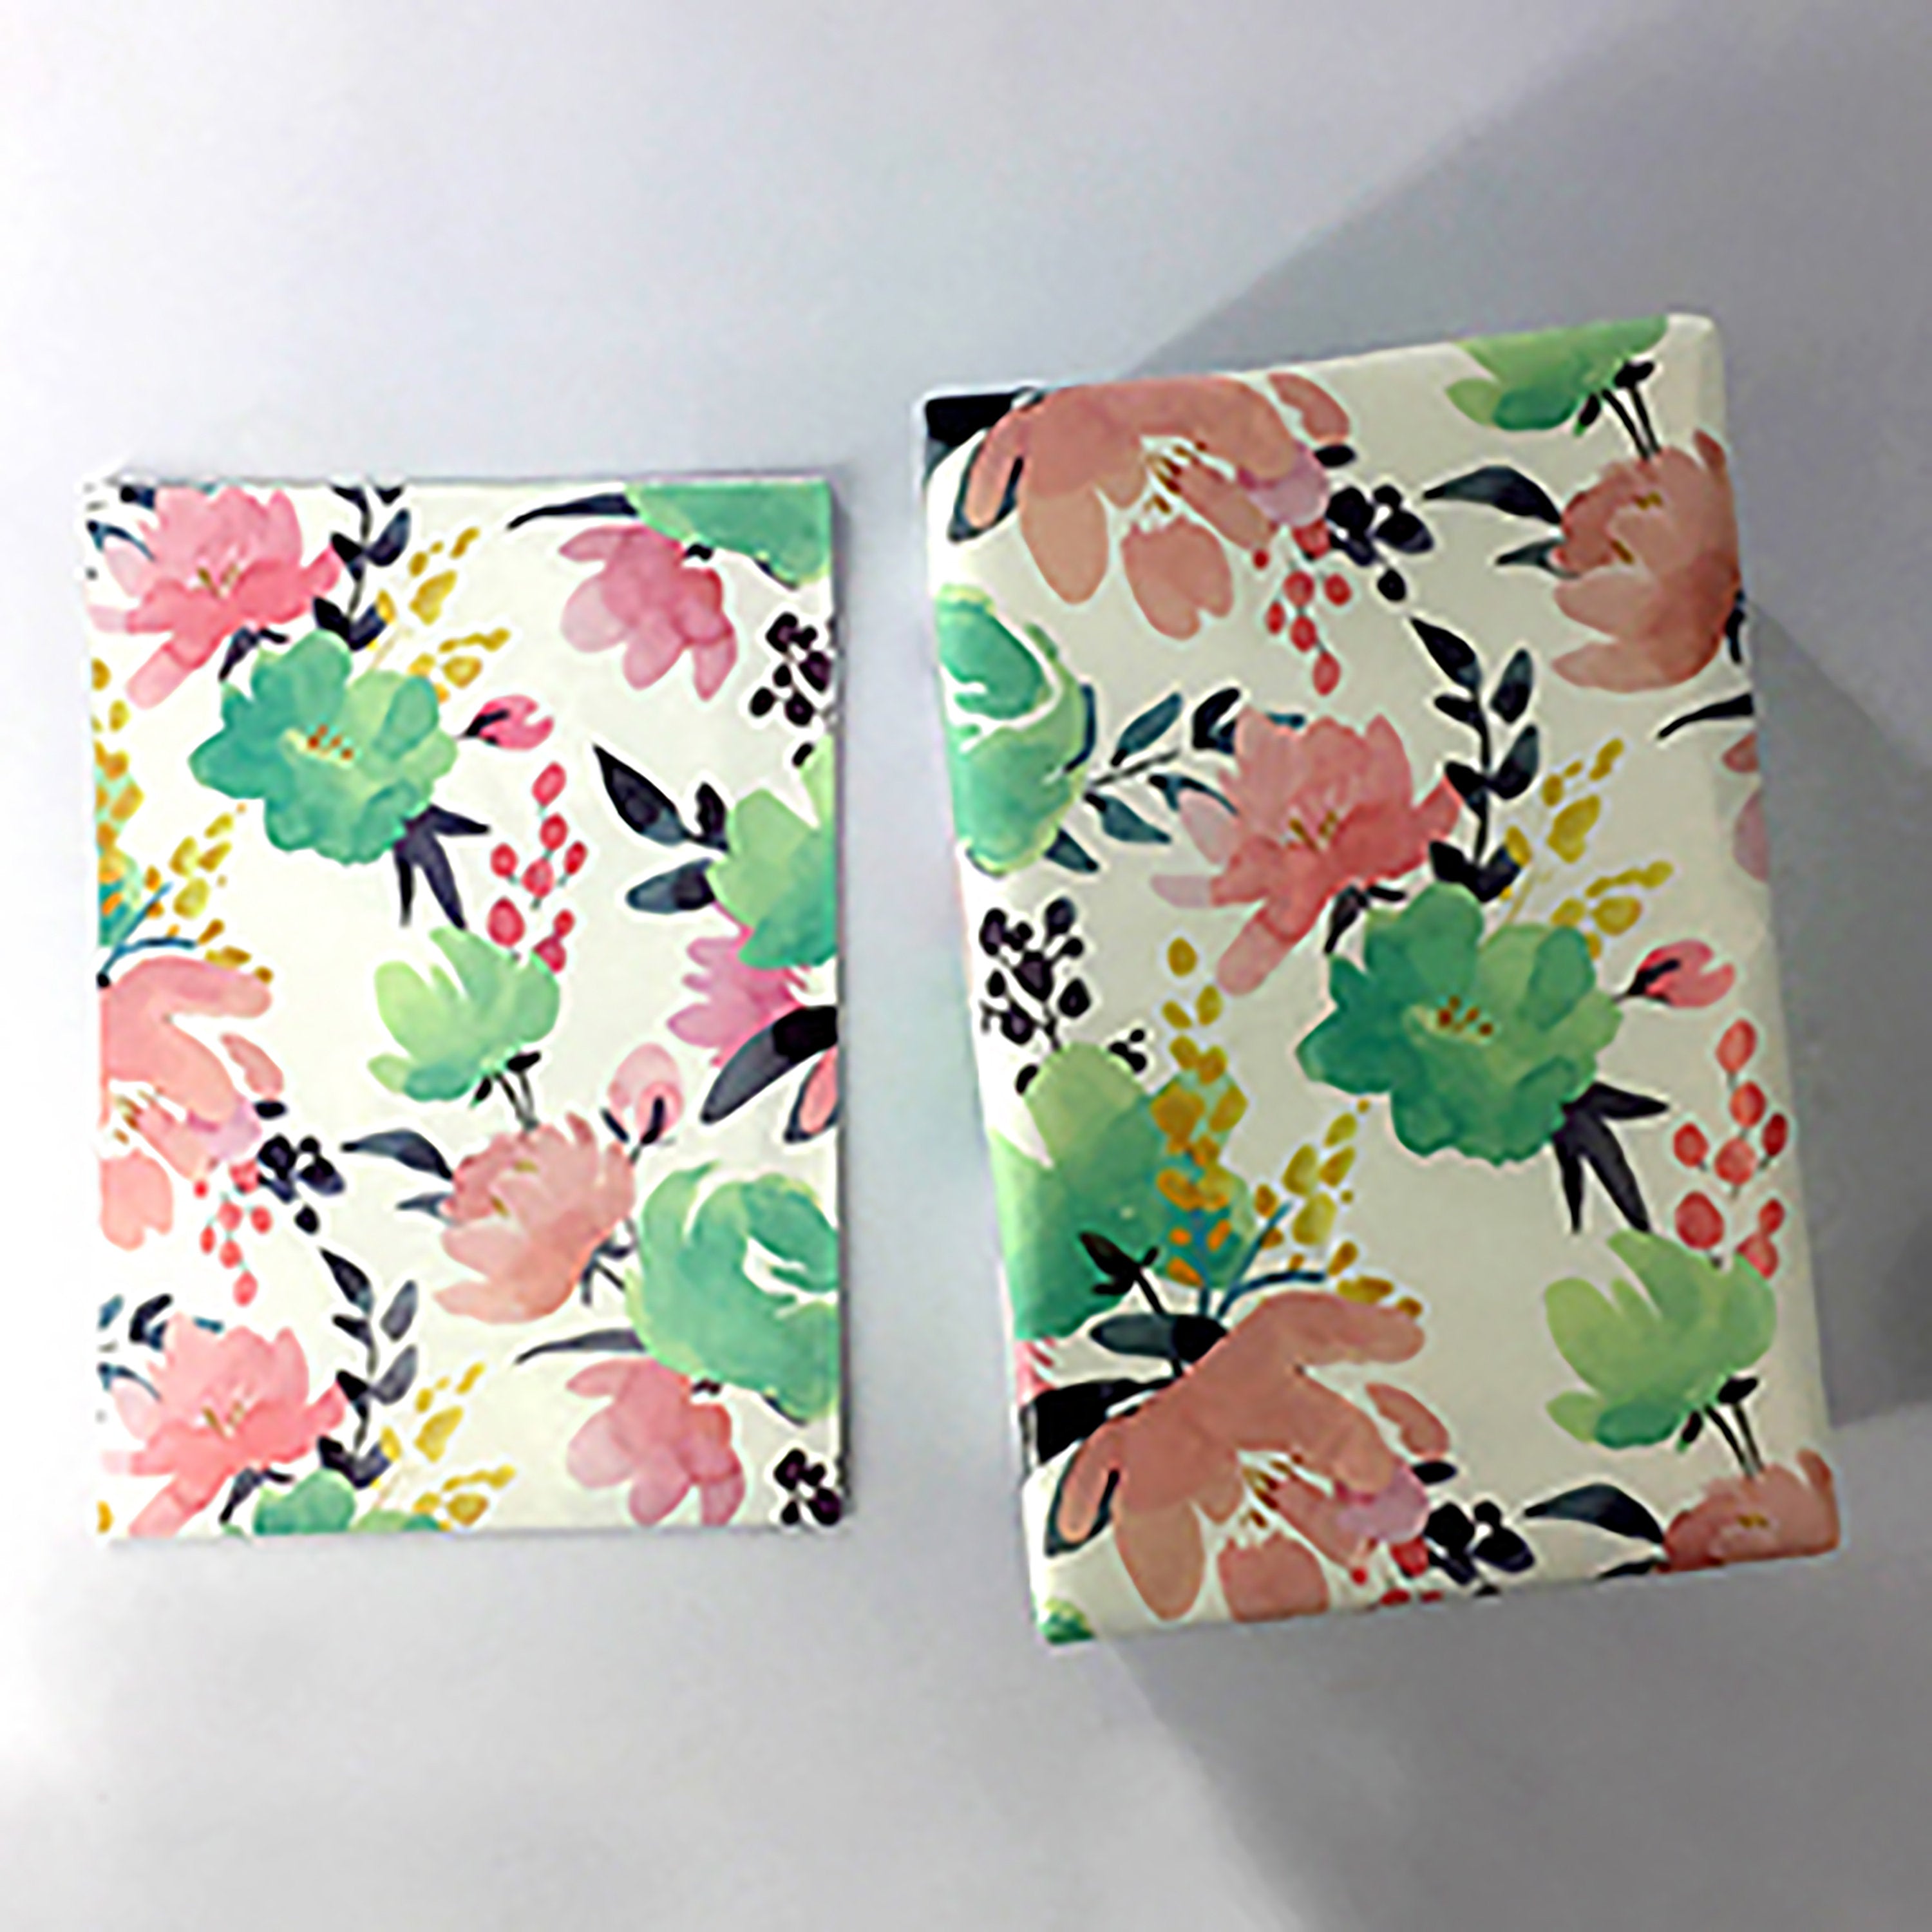 1pc, 50x70 cm, Flat Gift Wrap / Gift Wrapping Paper / Flat Pack Gift Wrap -  Flower / Nature / Floral Theme Party